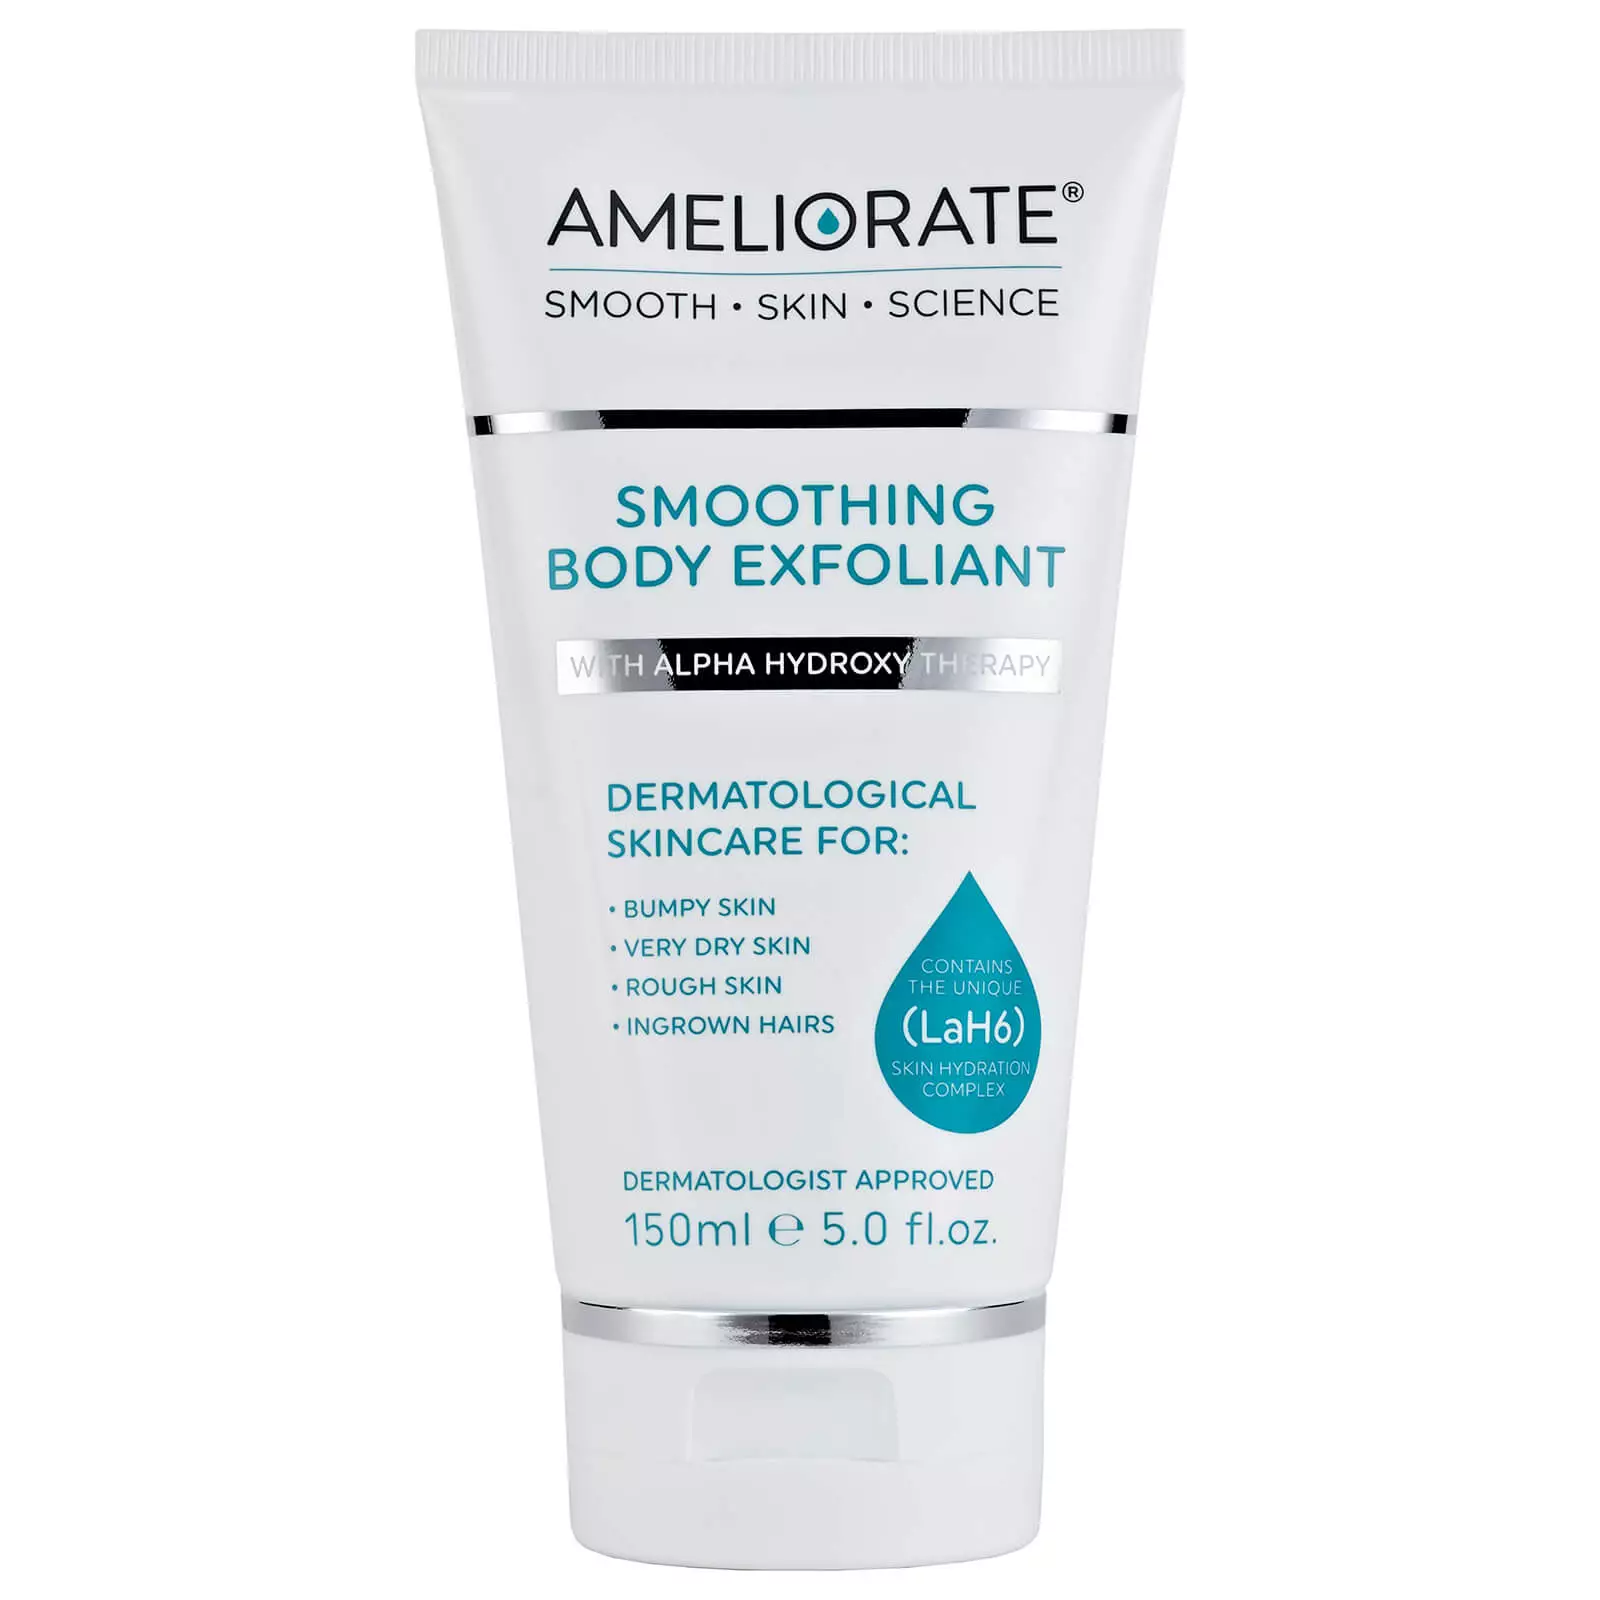 Ameliorate's Exfoliant is made using biodegradable bamboo granules and alpha hydroxy therapy (